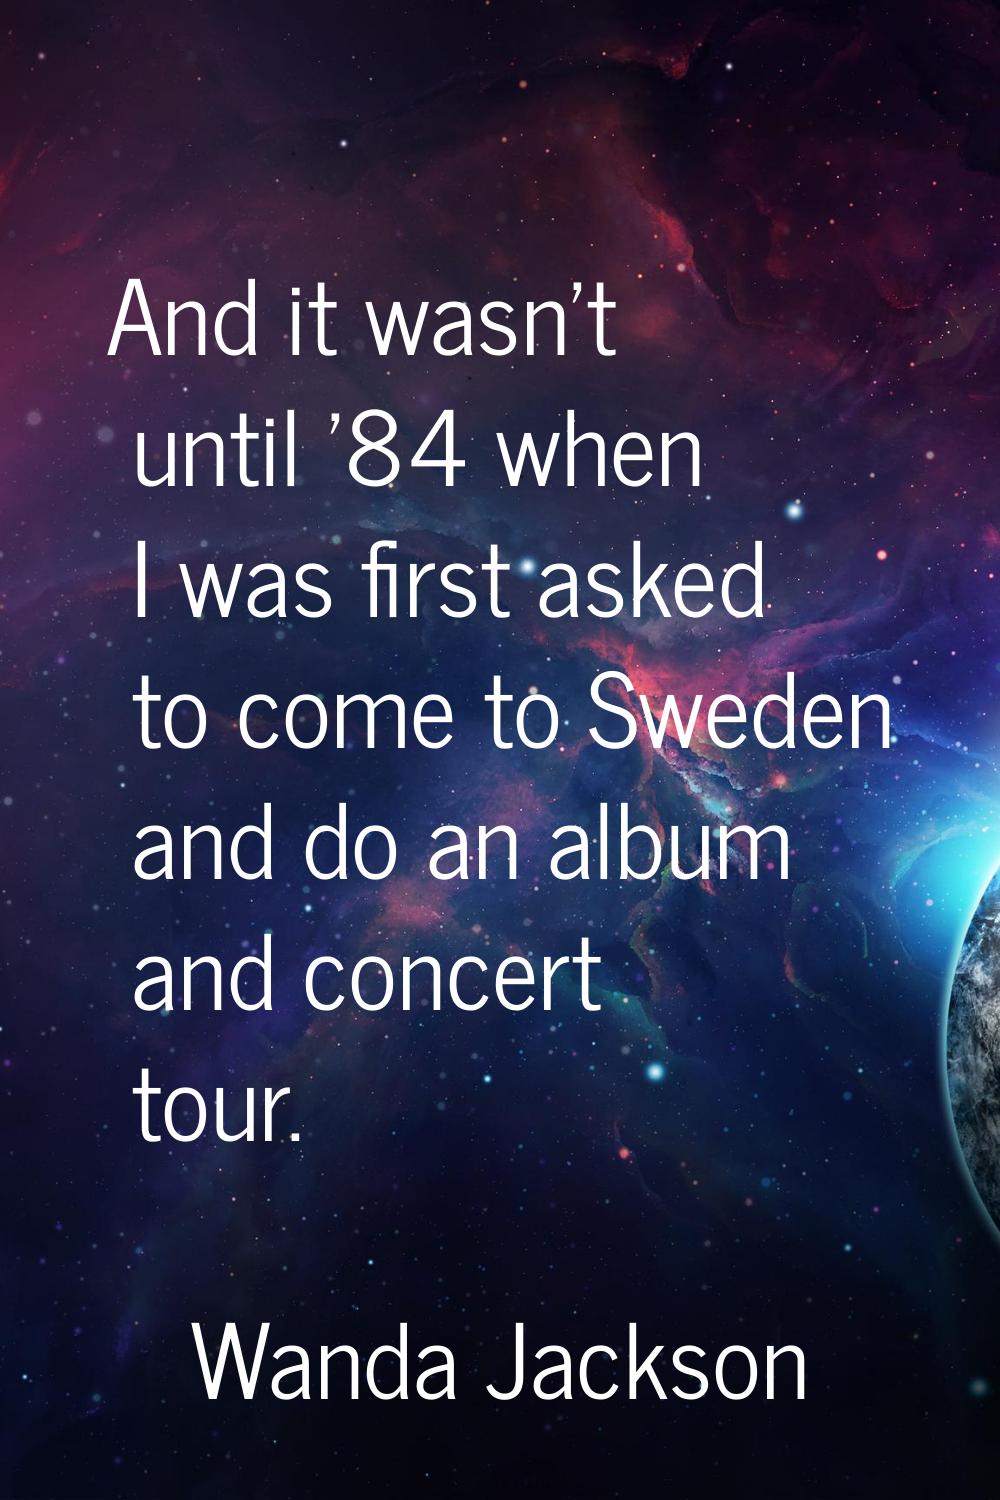 And it wasn't until '84 when I was first asked to come to Sweden and do an album and concert tour.